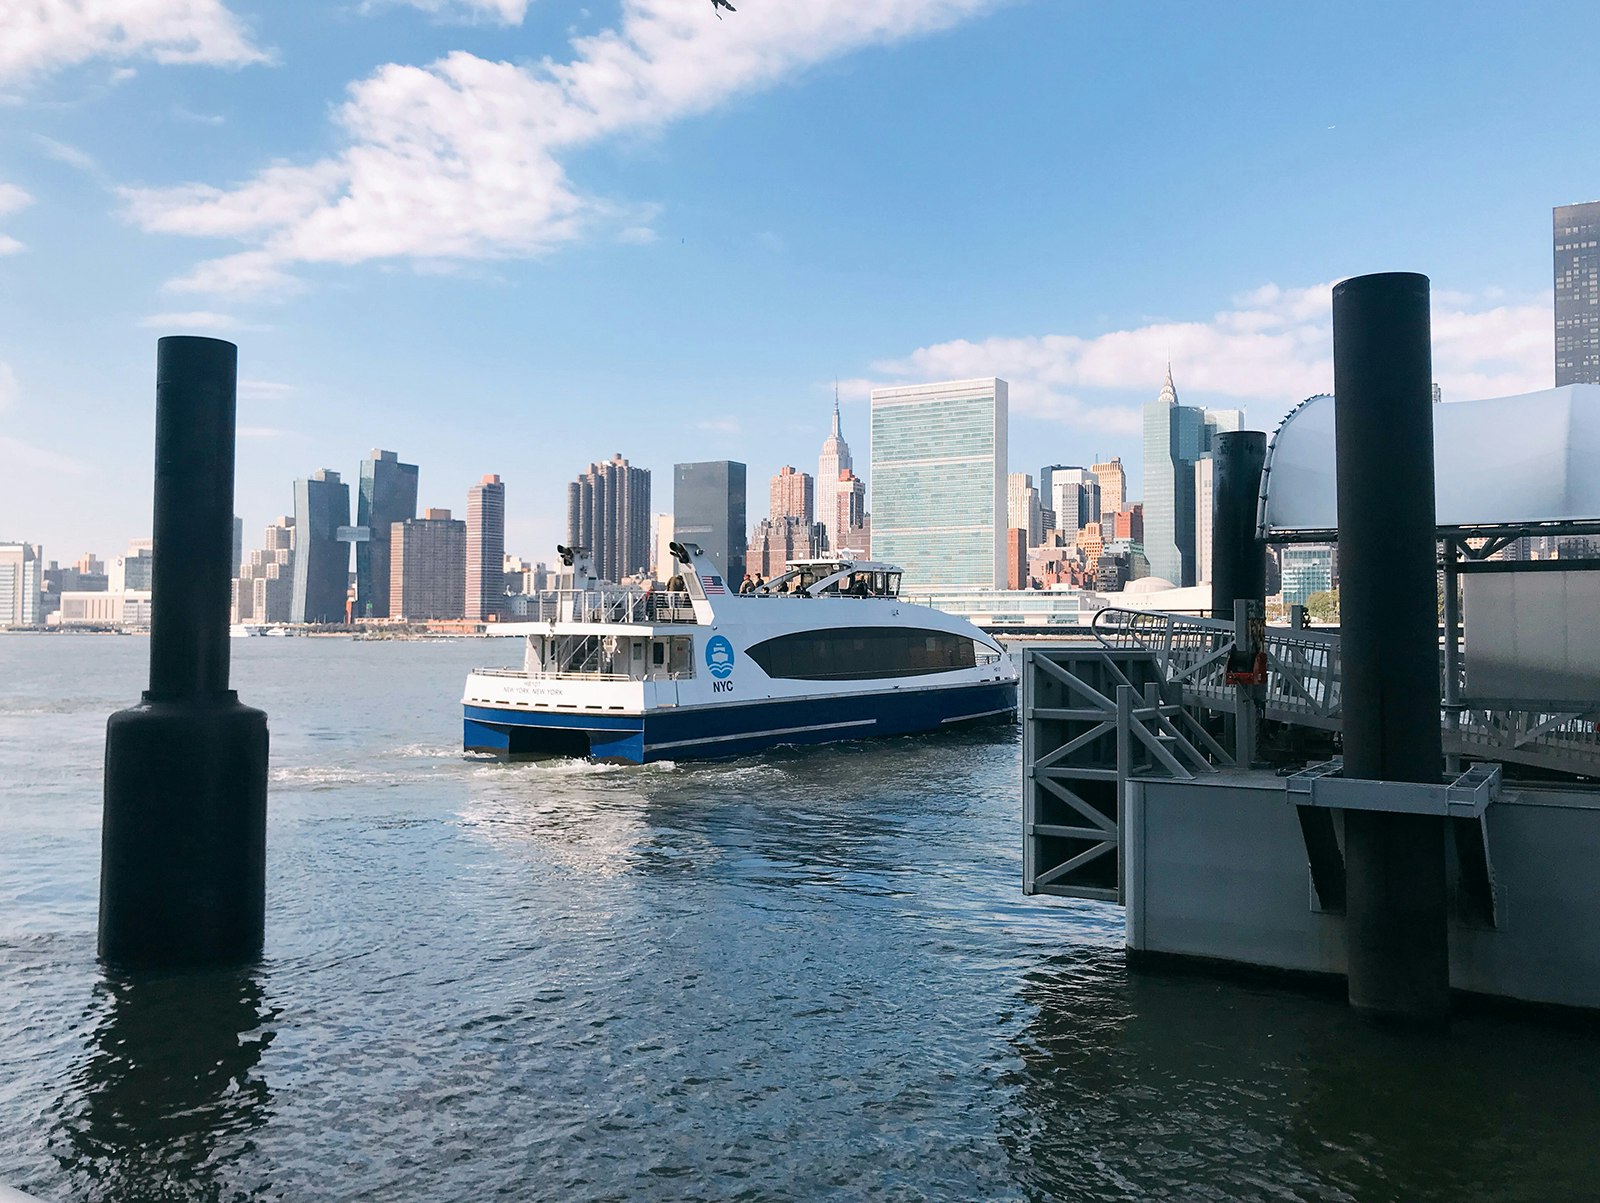 The NYC ferry floats in the harbor near Queens with skyscrapers in the background on a sunny fall day